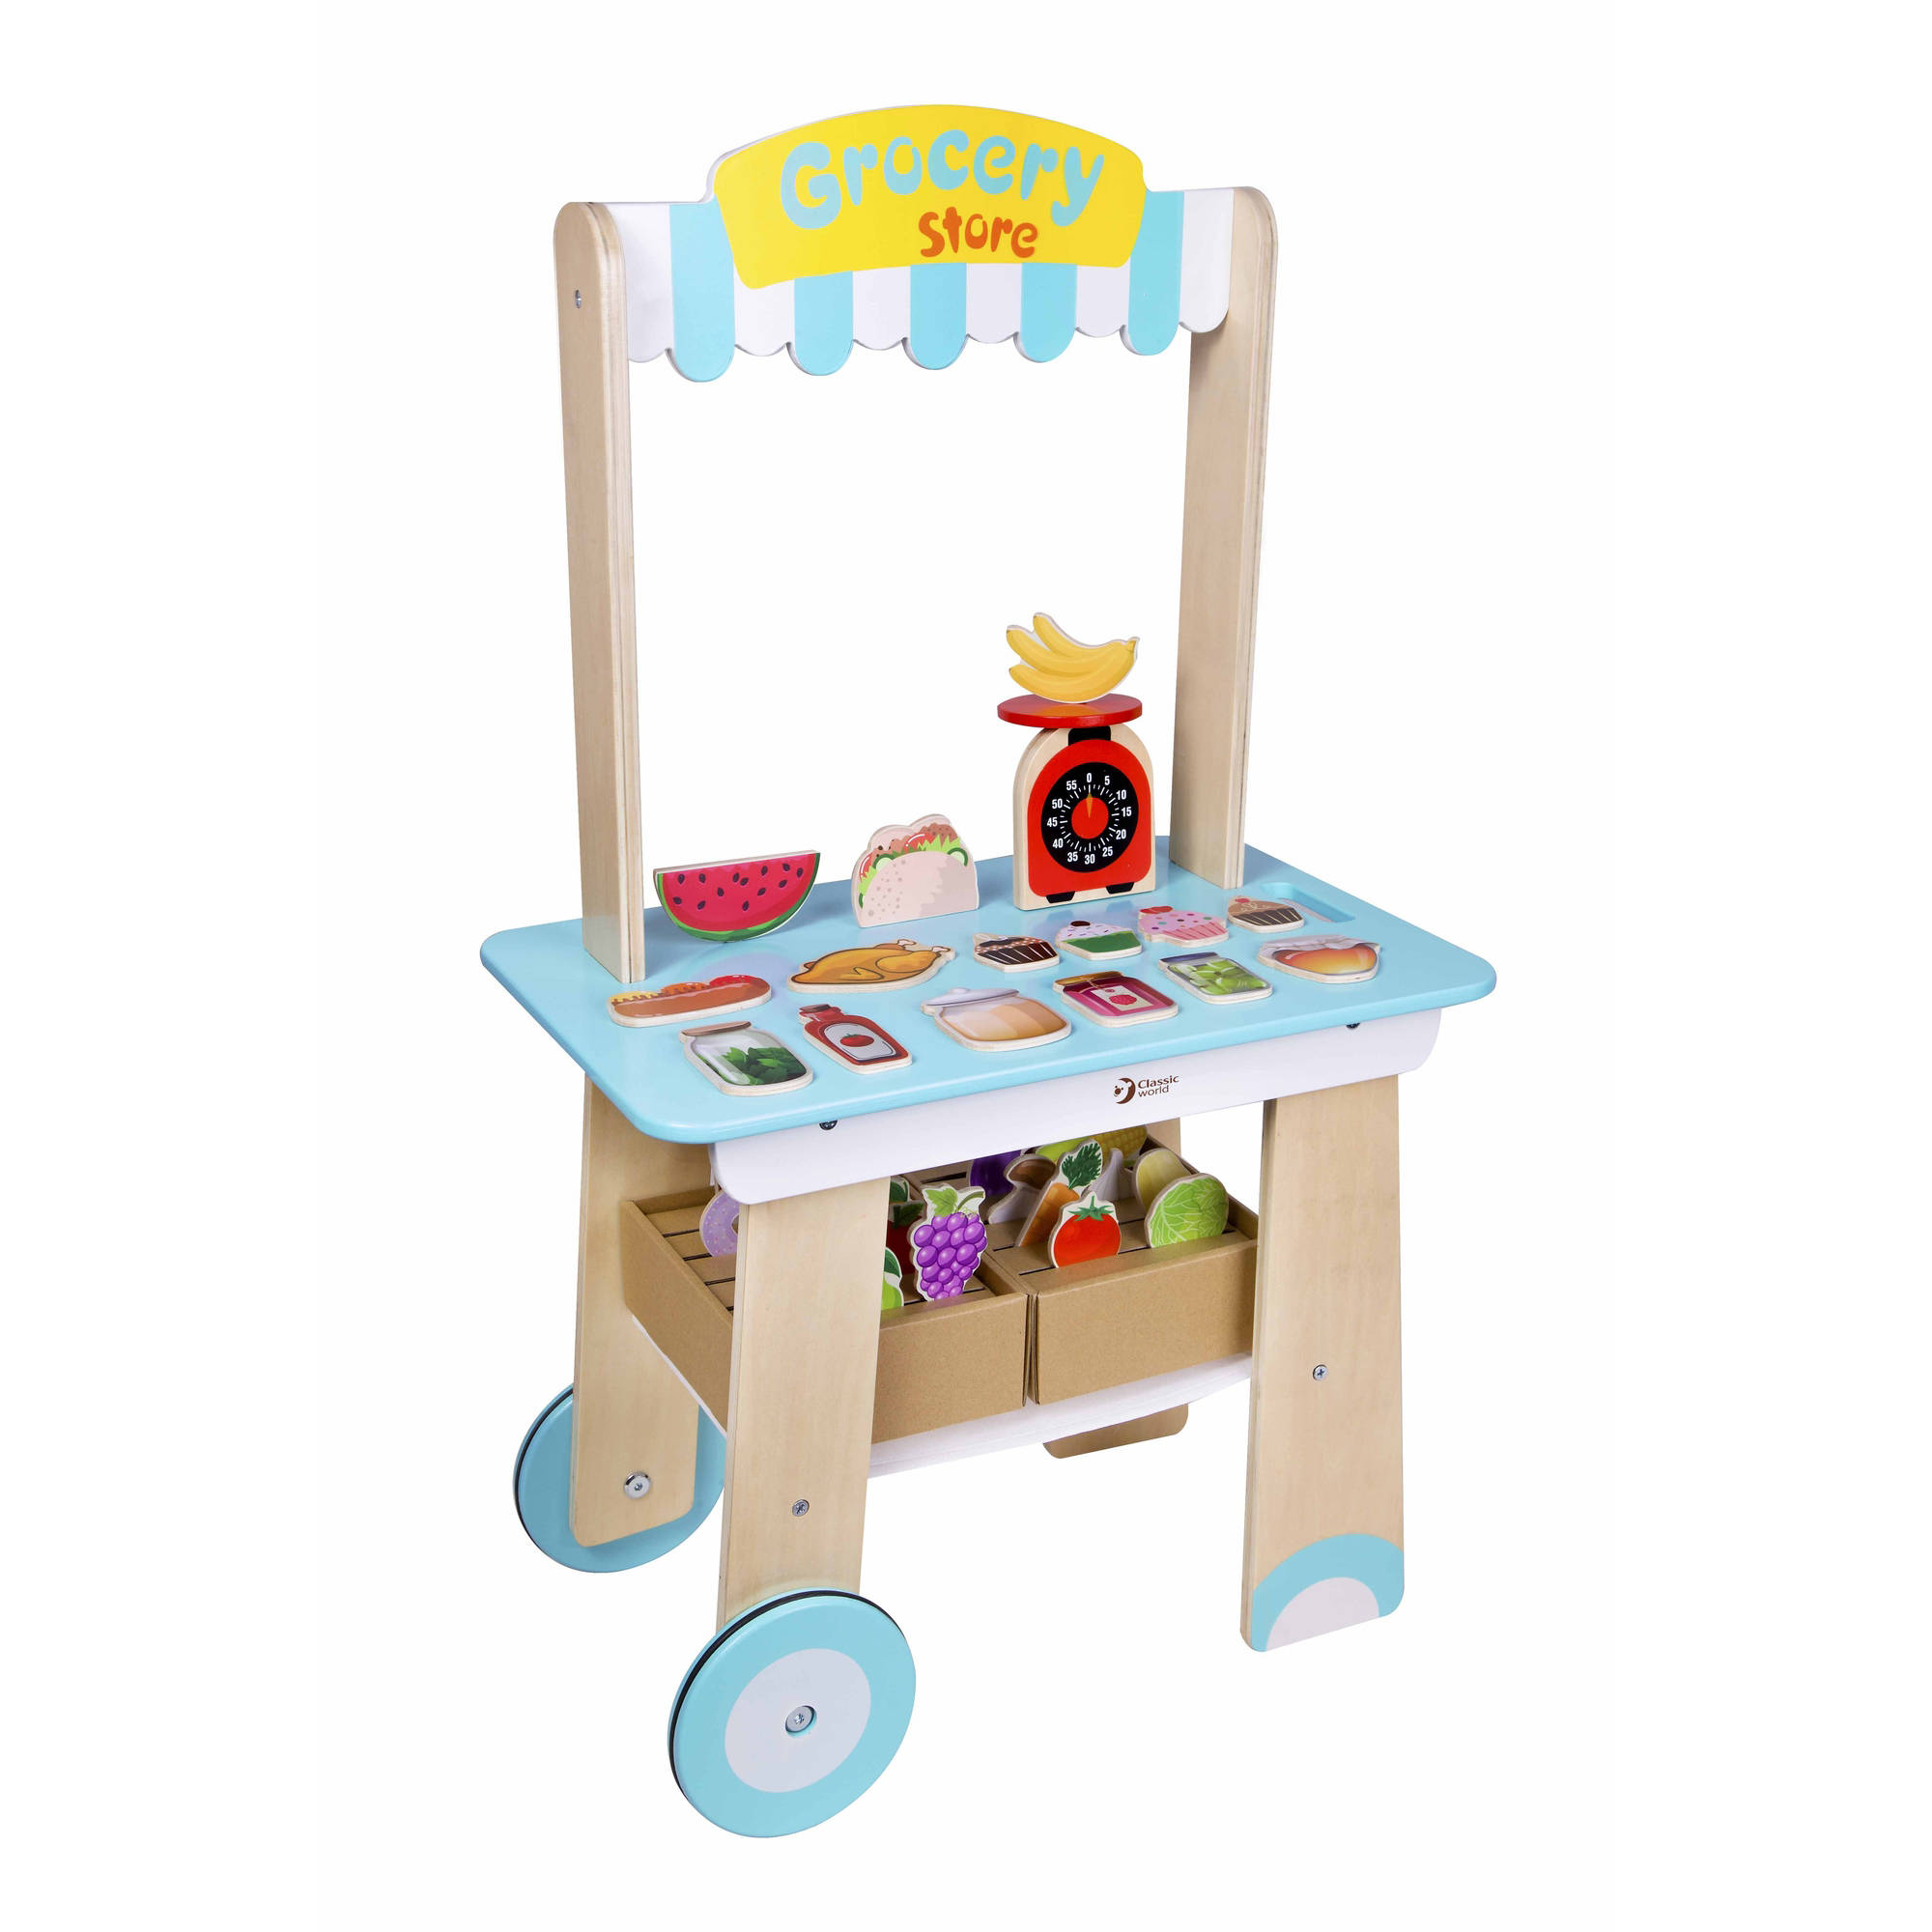 Classic World Wooden Toy Grocery Store Playset - Ages 3 Years and up. - image 1 of 2